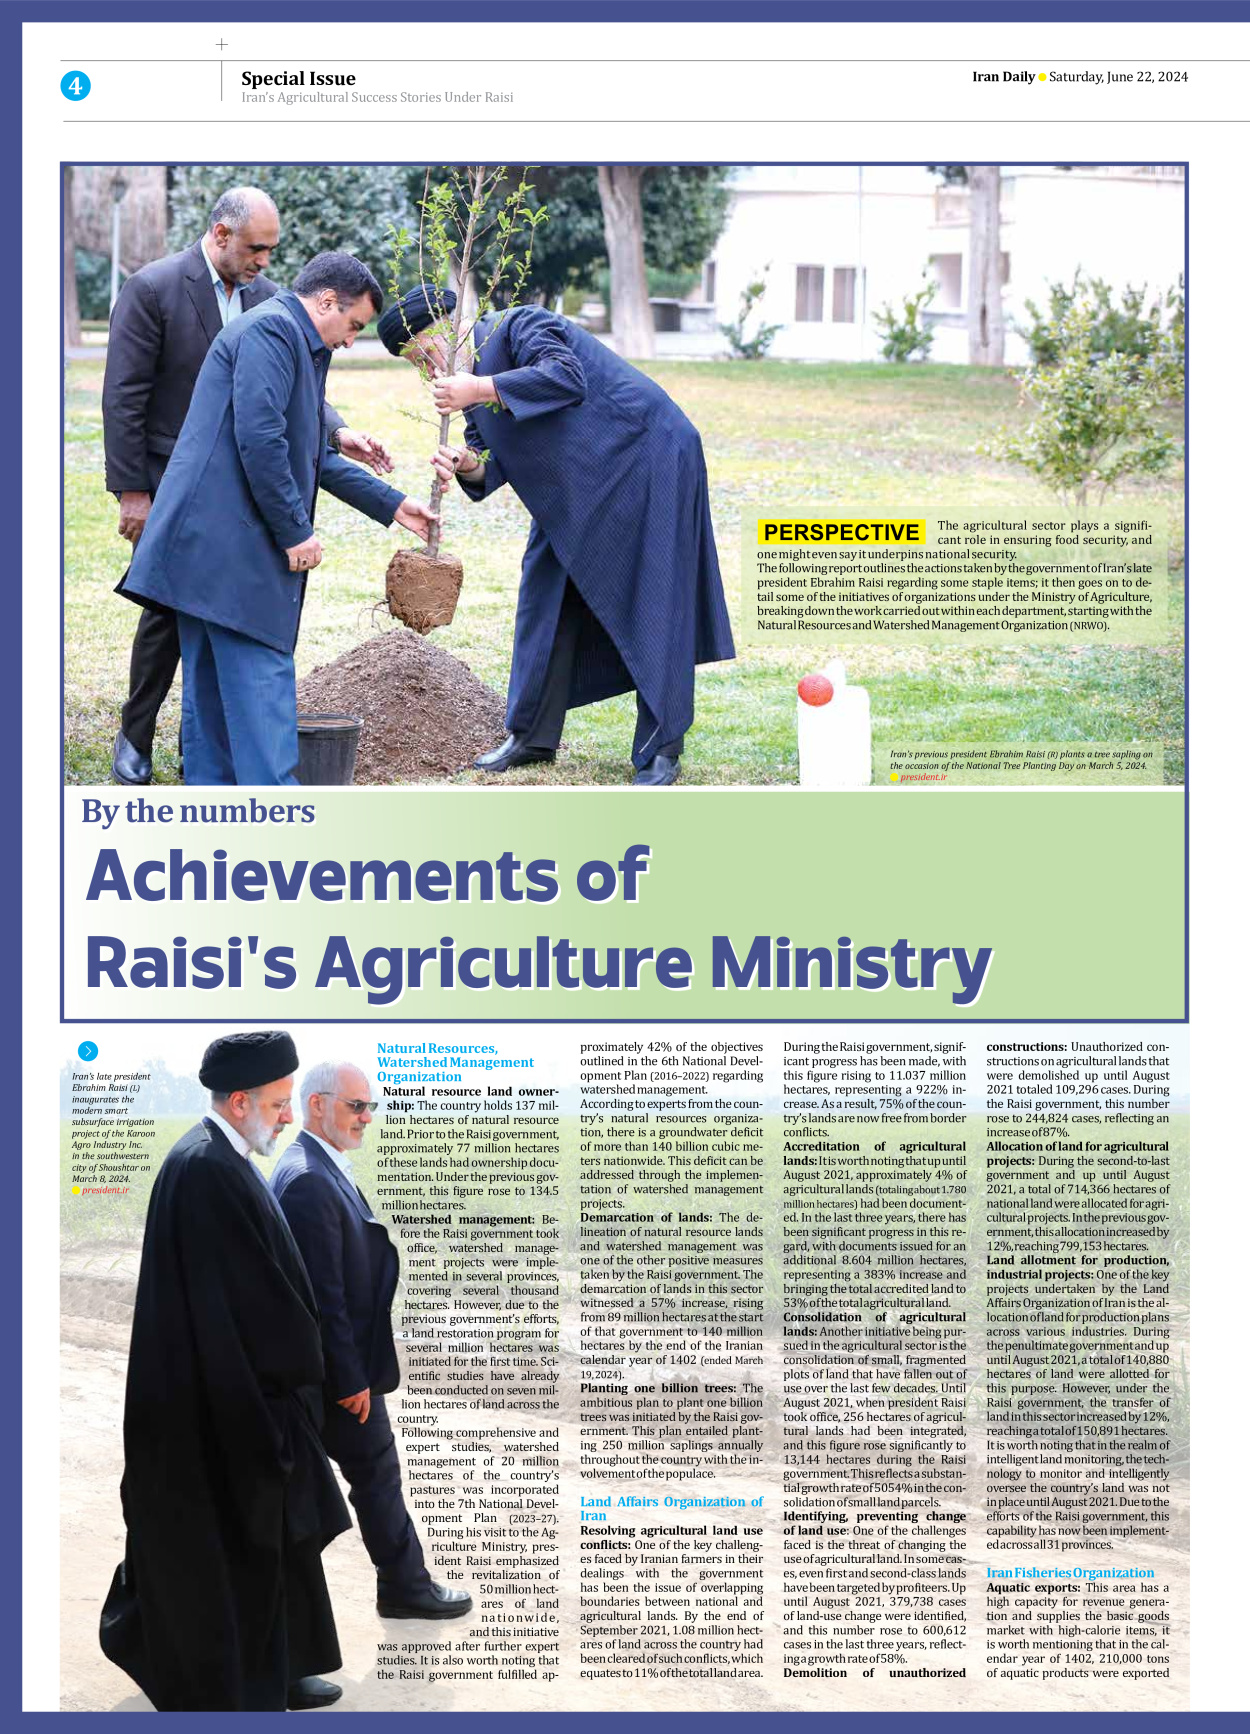 Iran Daily - Number Seven Thousand Five Hundred and Eighty Six - 22 June 2024 - Page 4